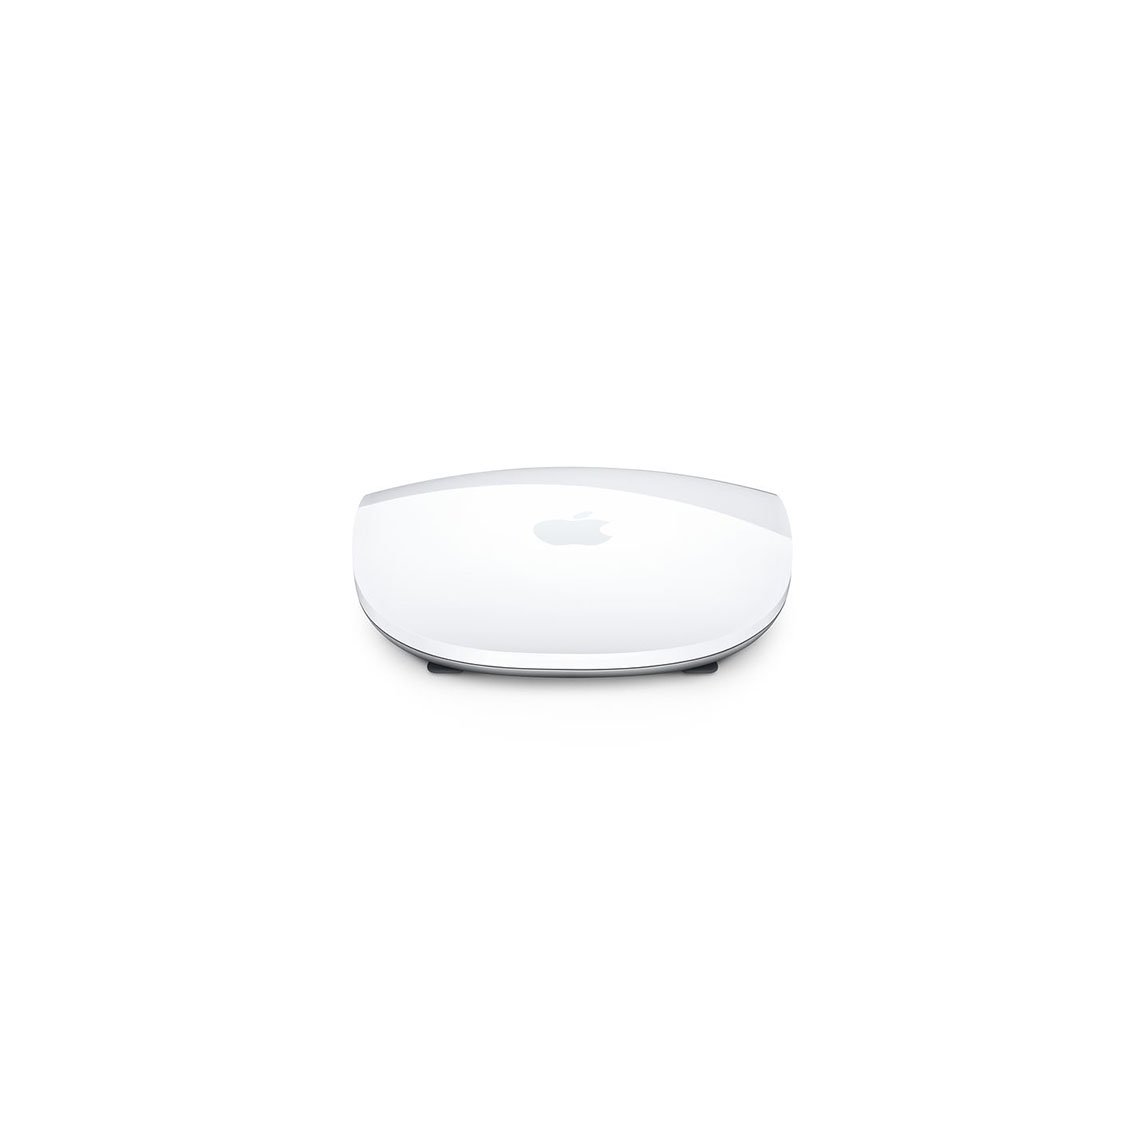 Apple Wireless Mouse